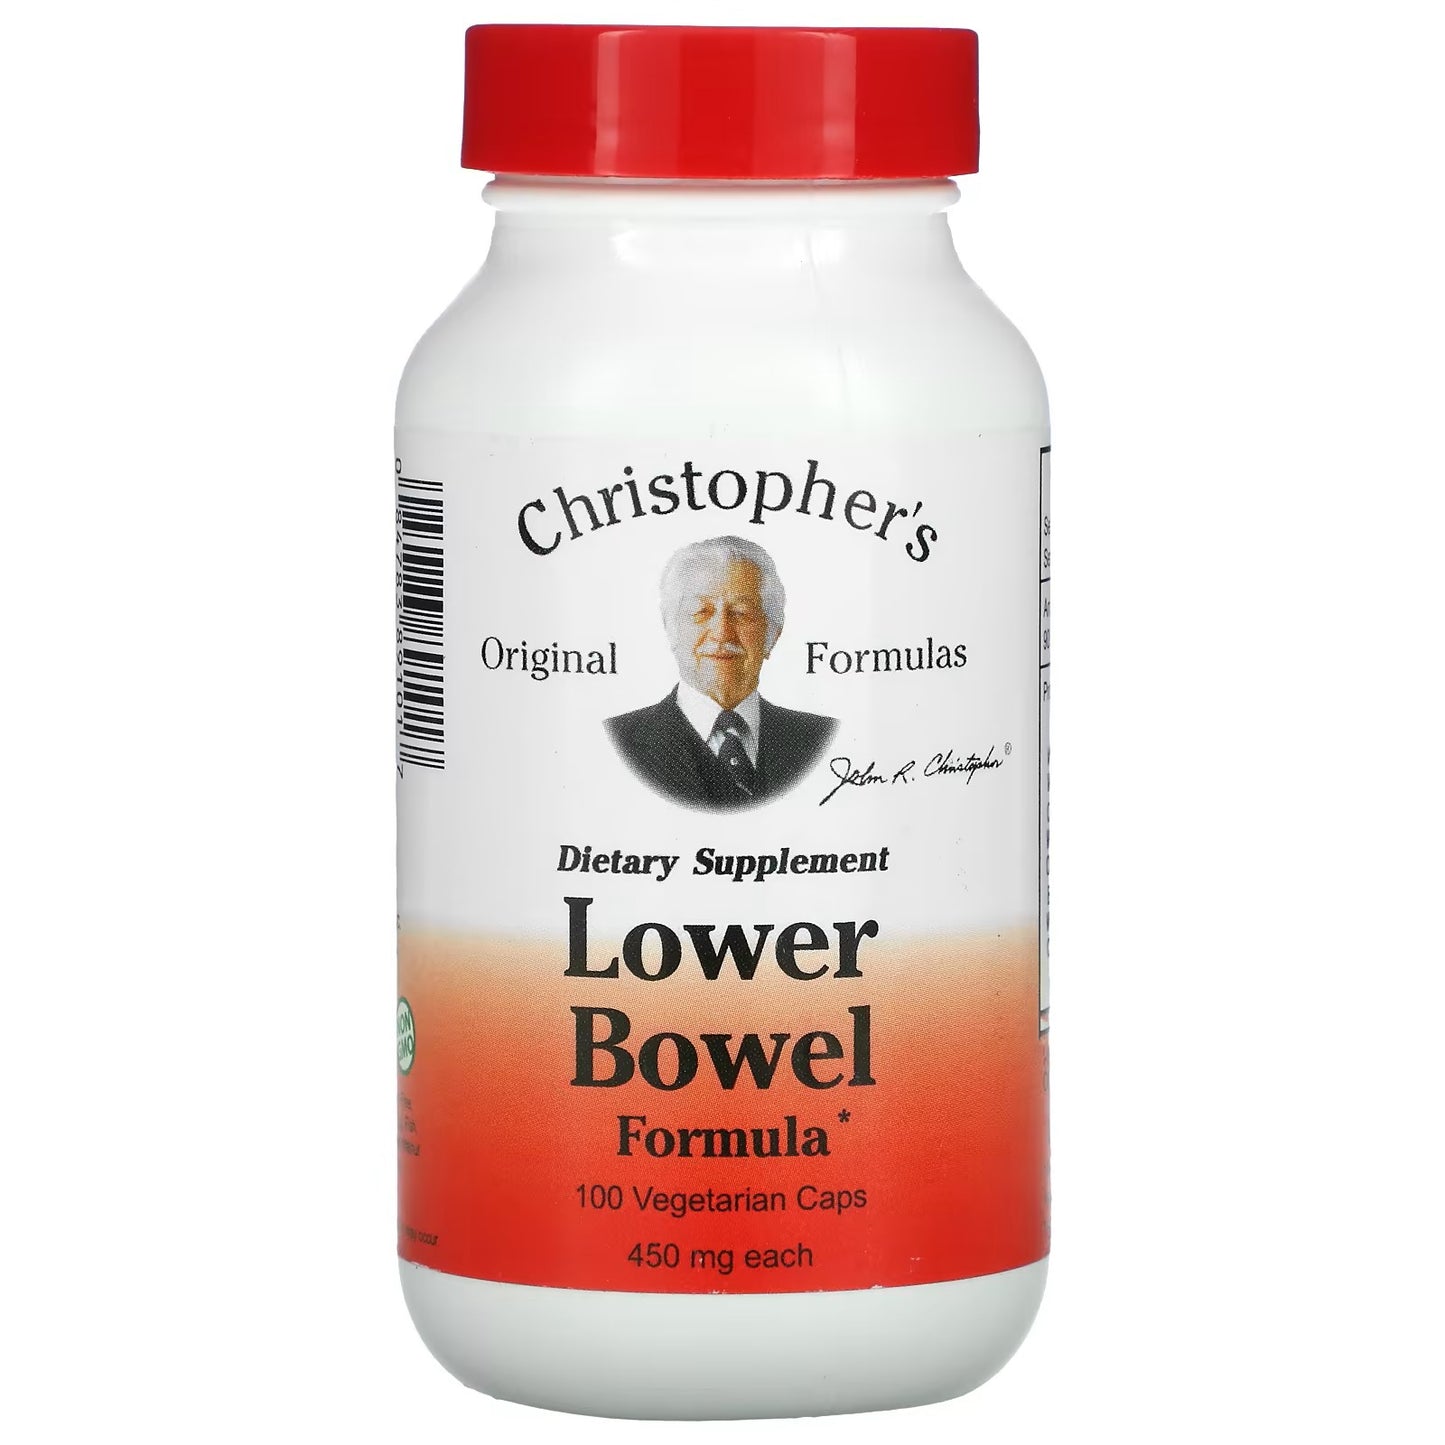 Lower Bowel Formula Herbs by Dr. Christopher